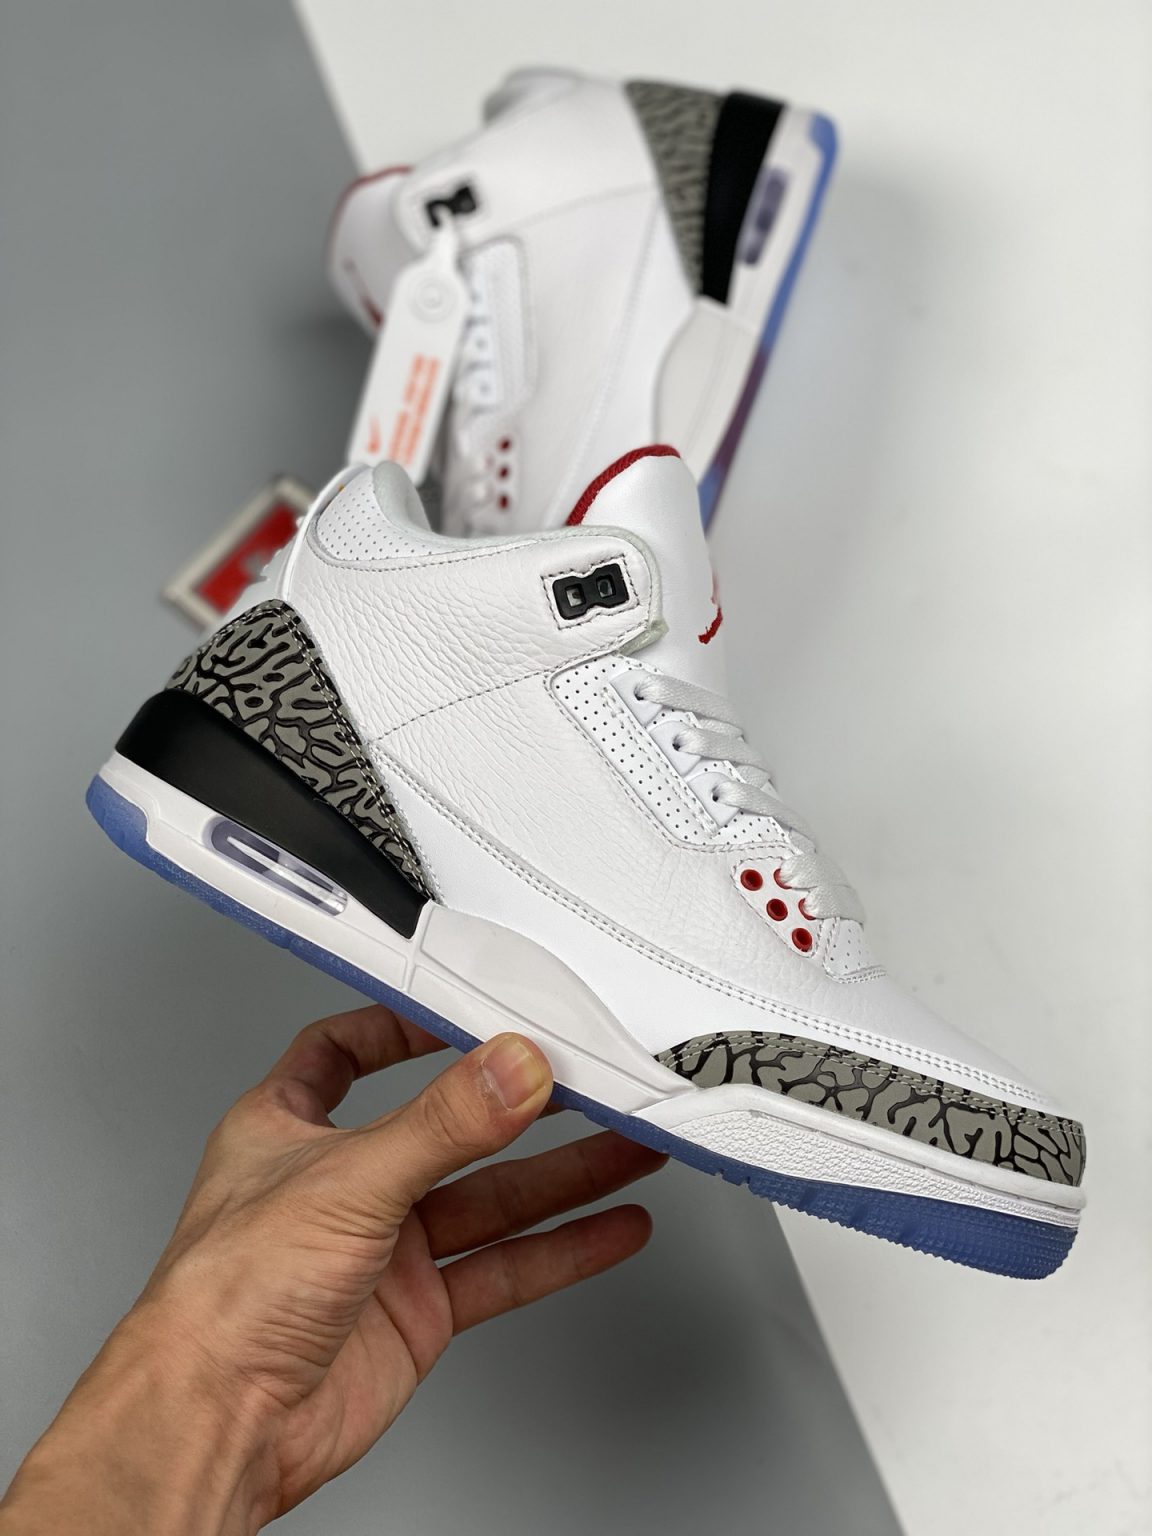 Air Jordan 3 “Free Throw Line” White/Black-Fire Red-Cement Grey For ...